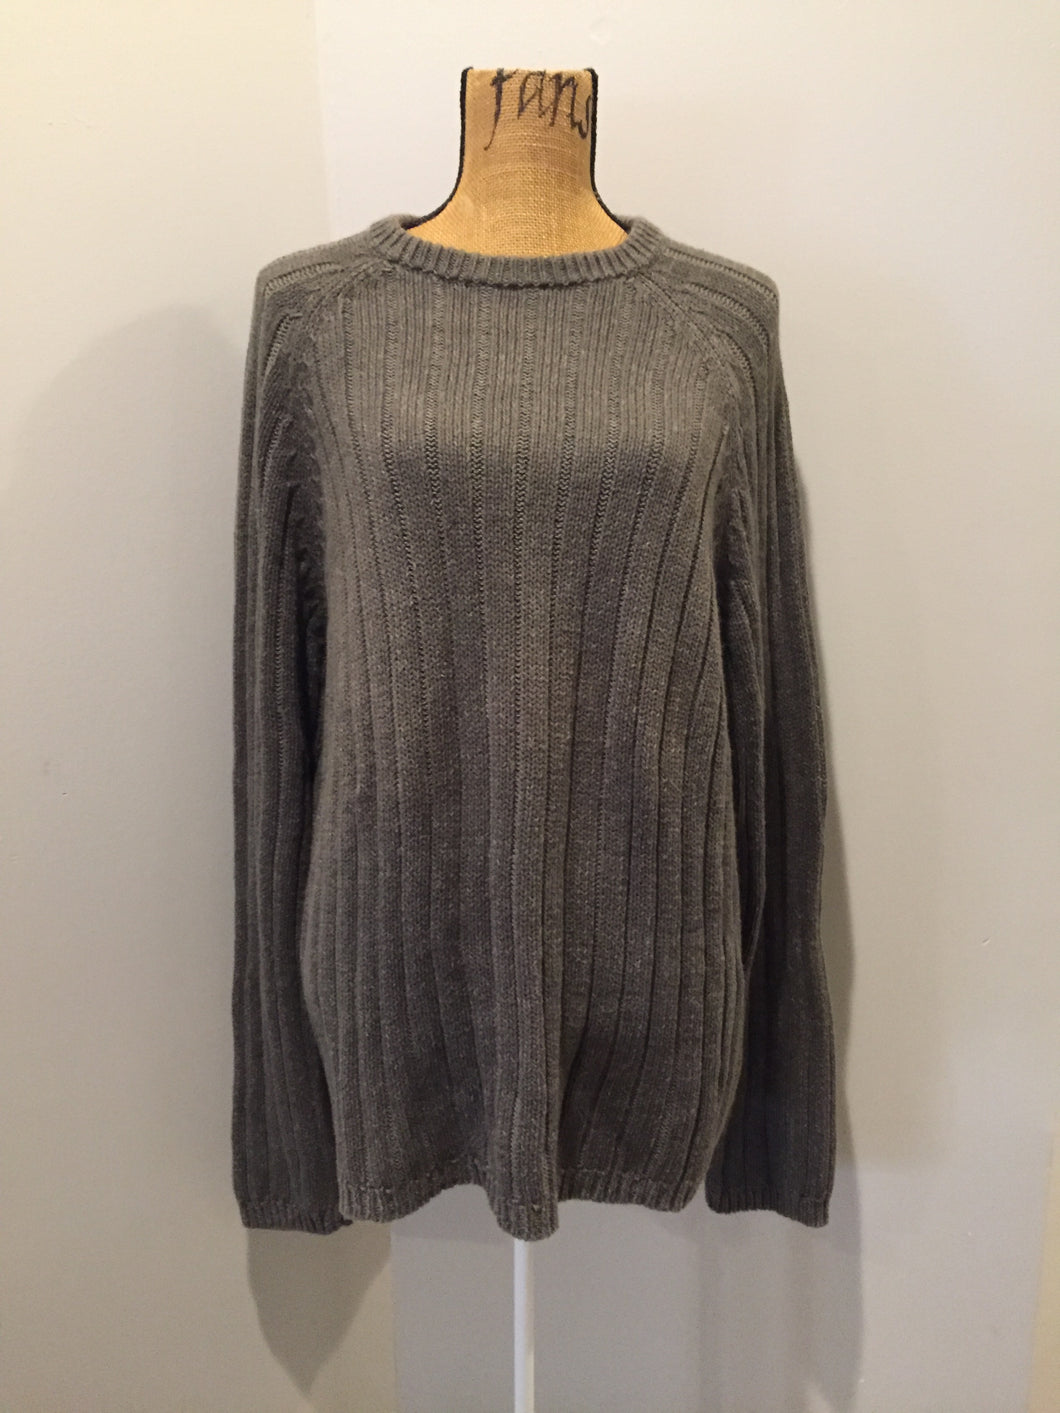 Kingspier Vintage - Woolrich ribbed knit wool sweater in army green. Size XL.